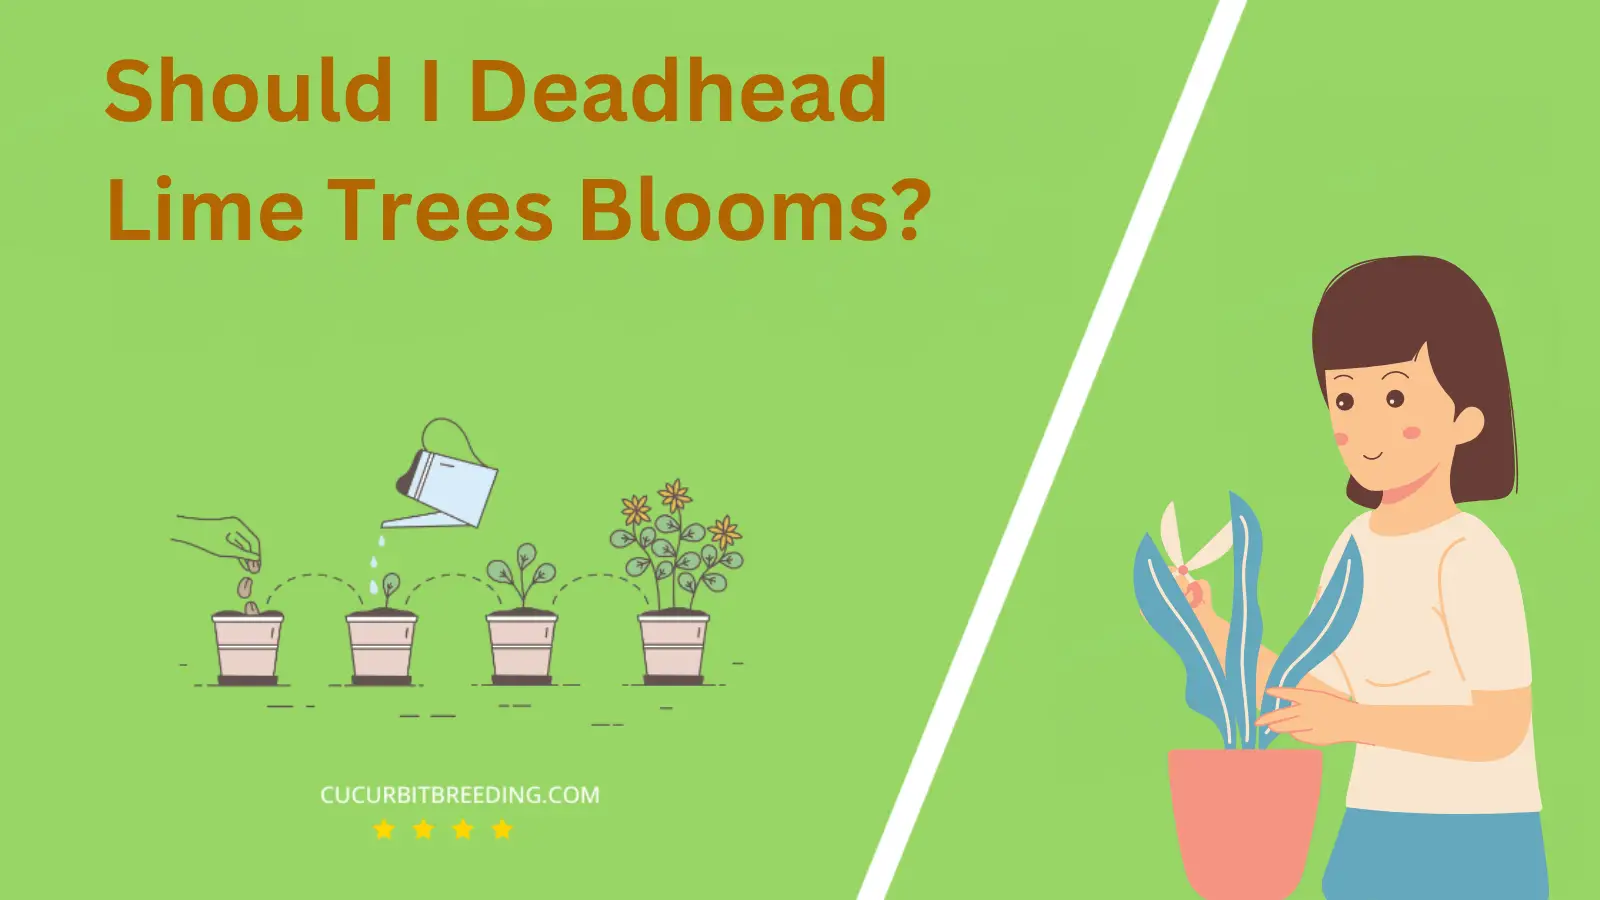 Should I Deadhead Lime Trees Blooms?